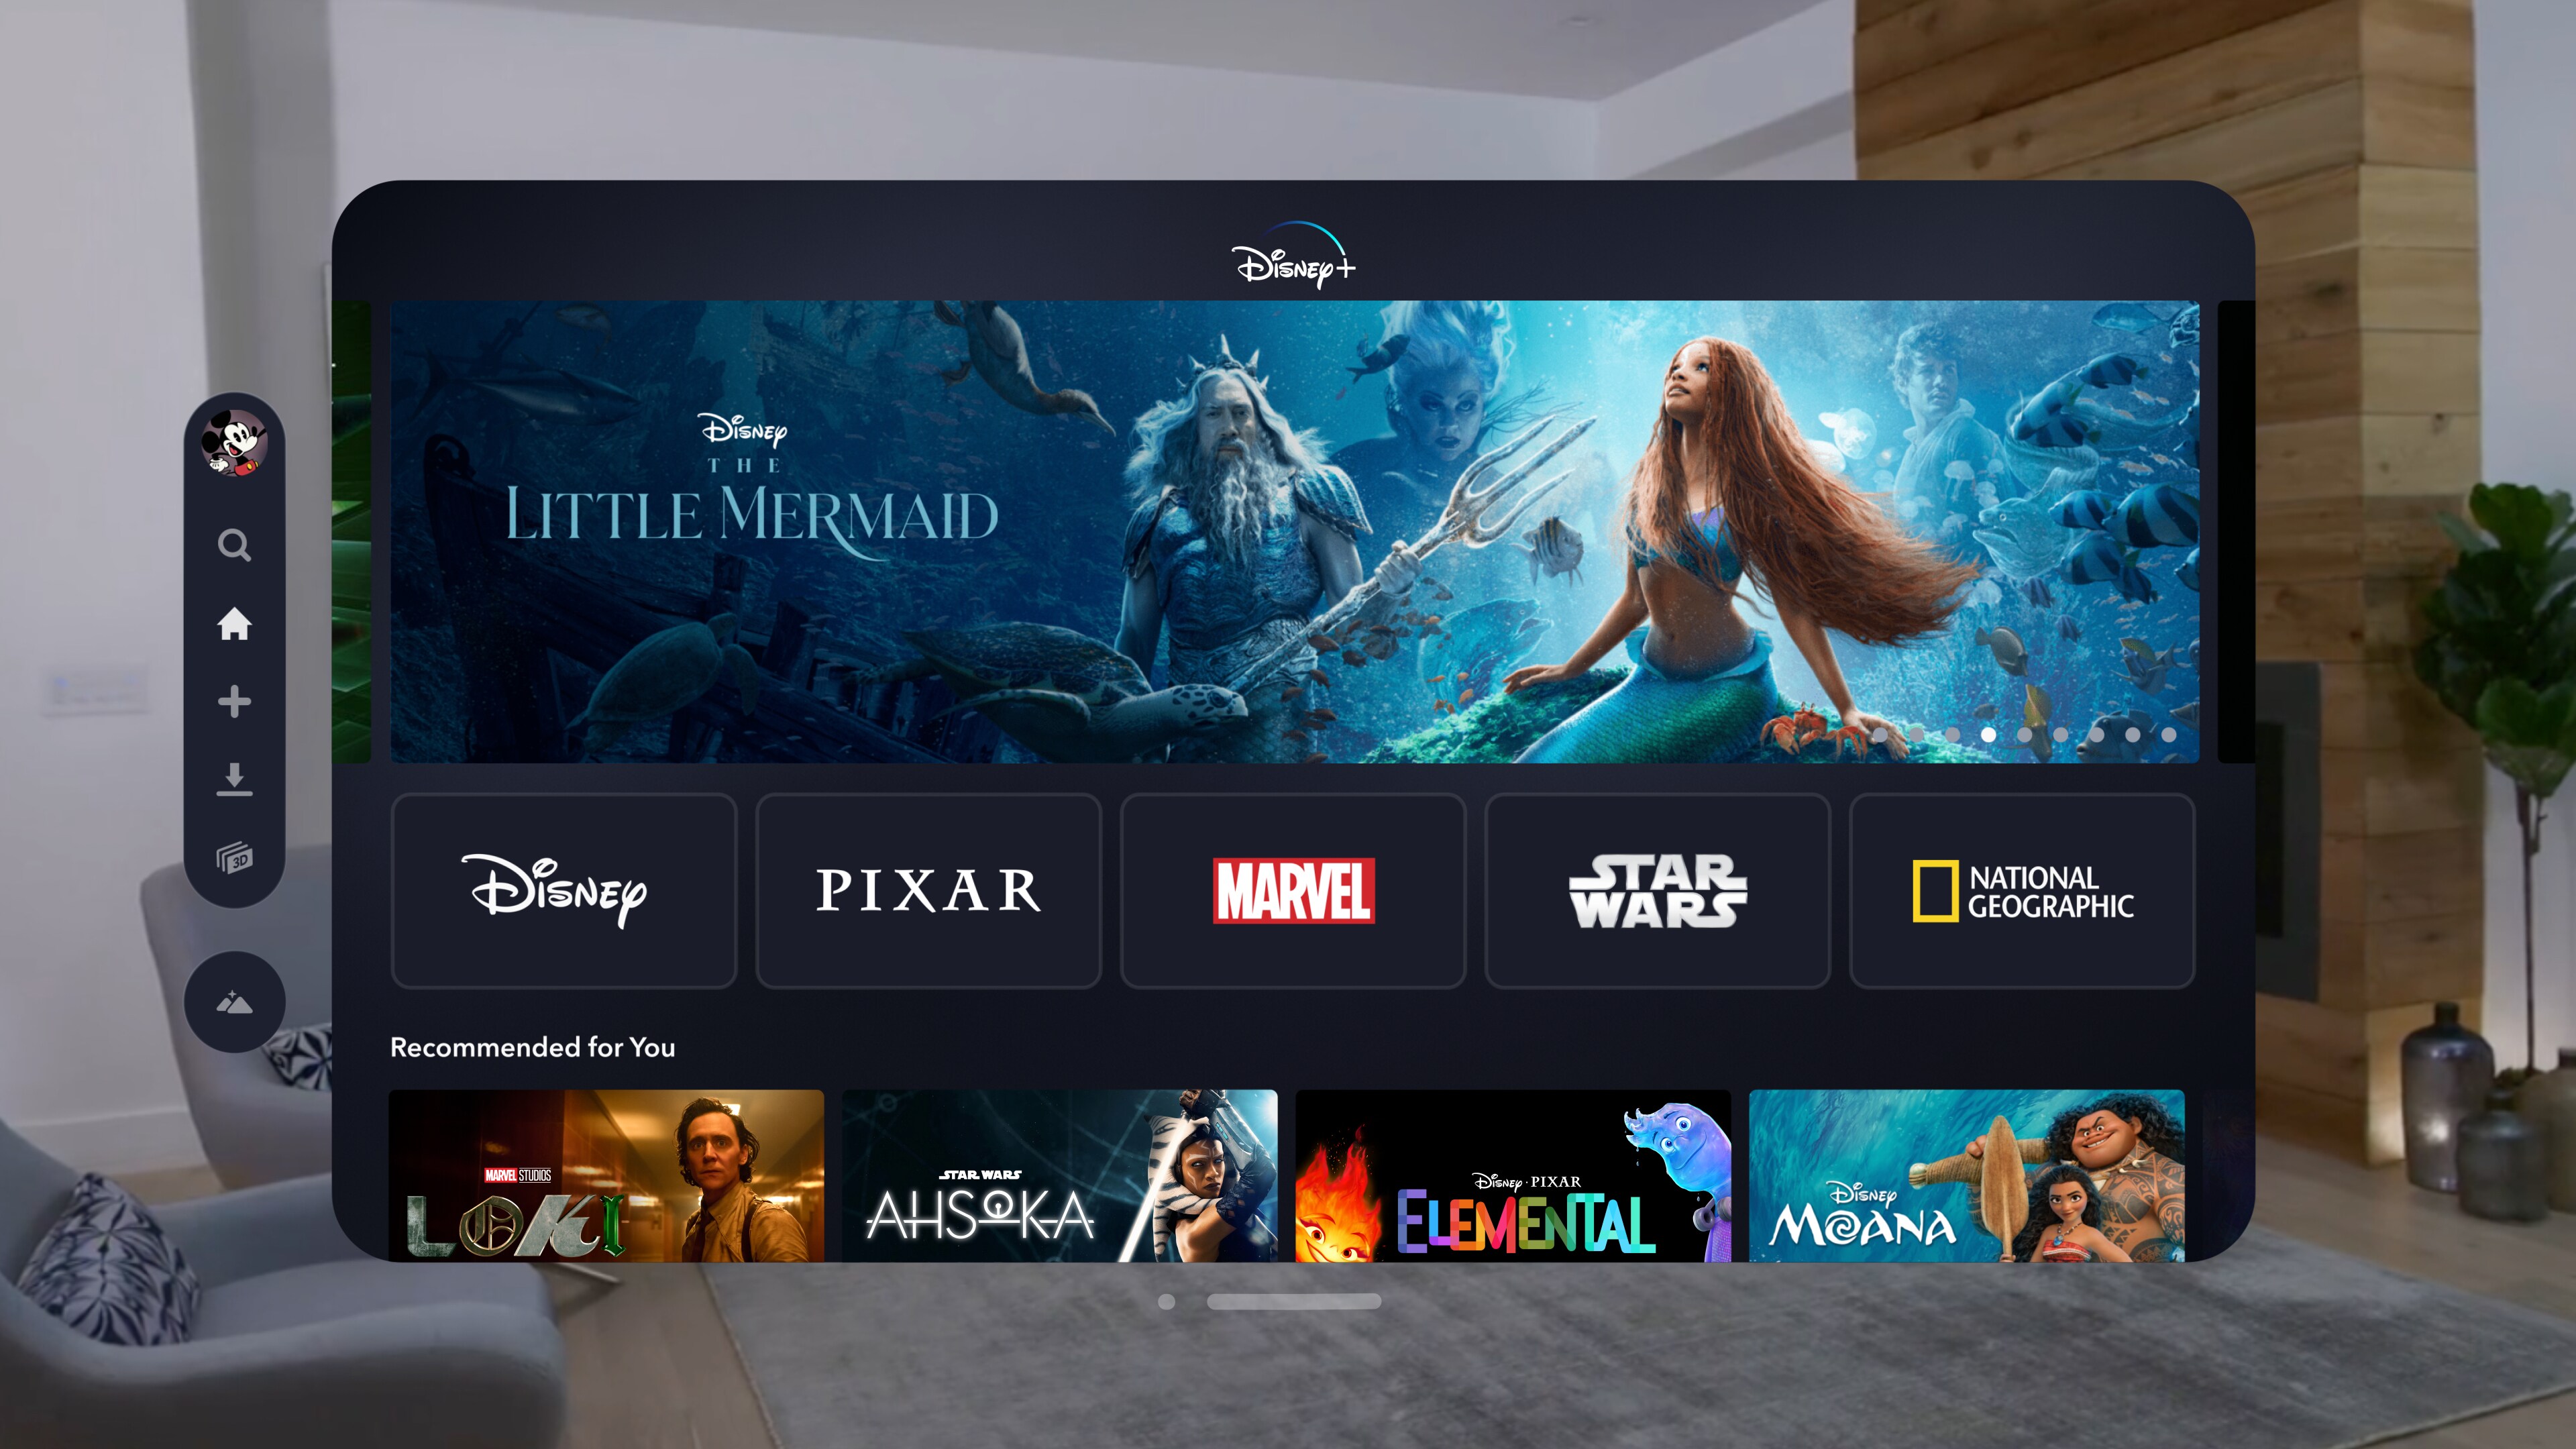 Disney Plus Relaunches on PS5, With Support for 4K HDR Playback - CNET